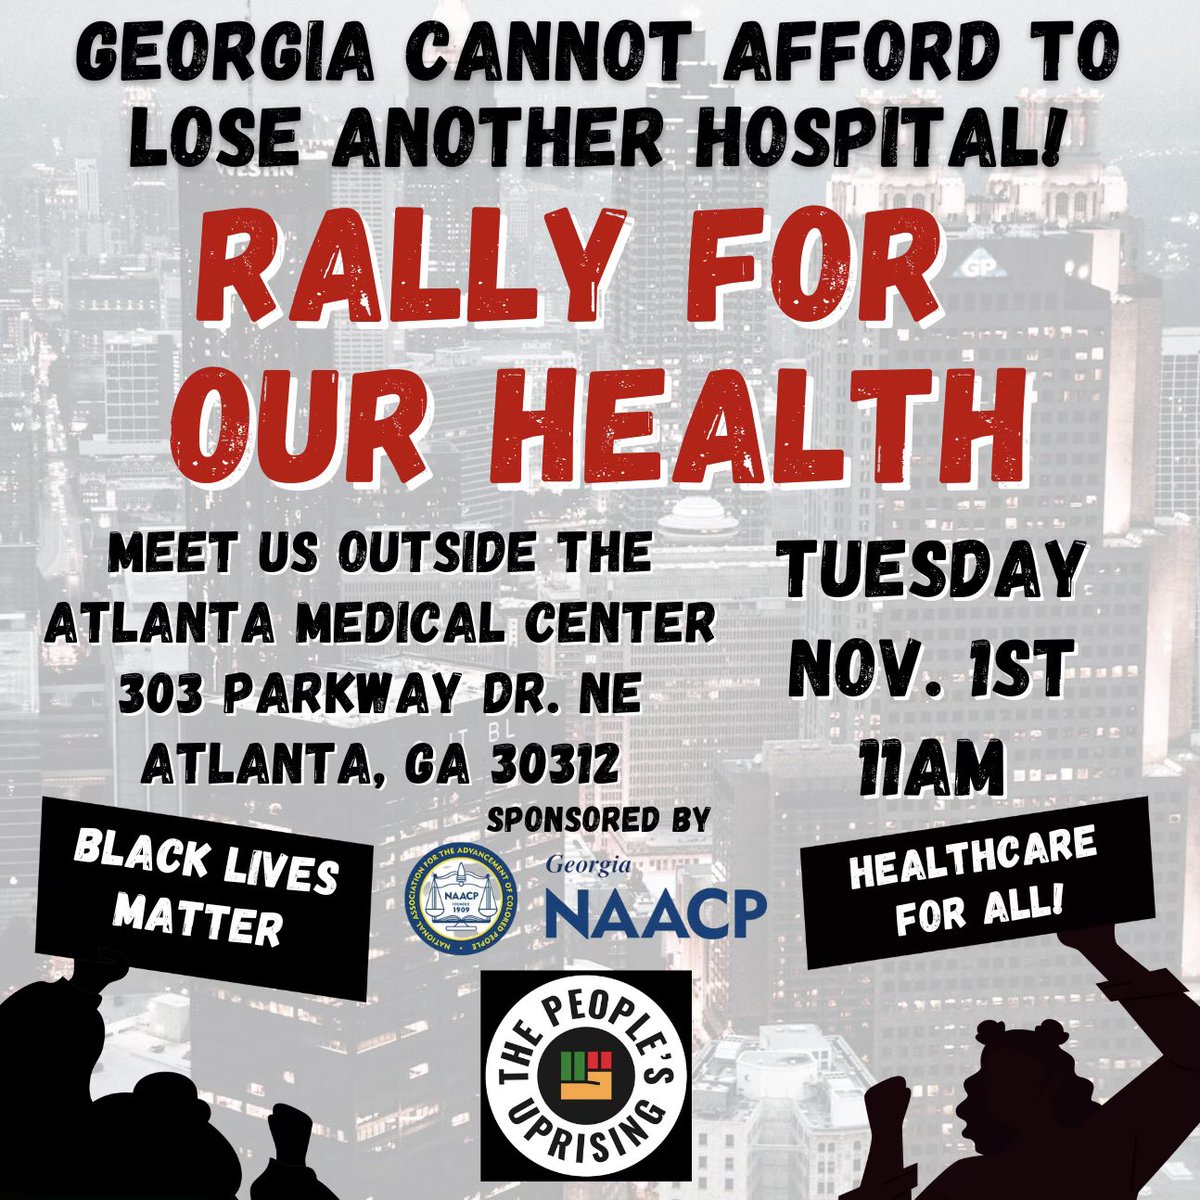 Join TPU, @Georgia_NAACP and community leaders to share concerns about the impact of the Atlanta Medical Center closure and health inequities across Georgia ✊🏾 #Georgia #Atlanta #community eventbrite.com/e/rally-for-ou…